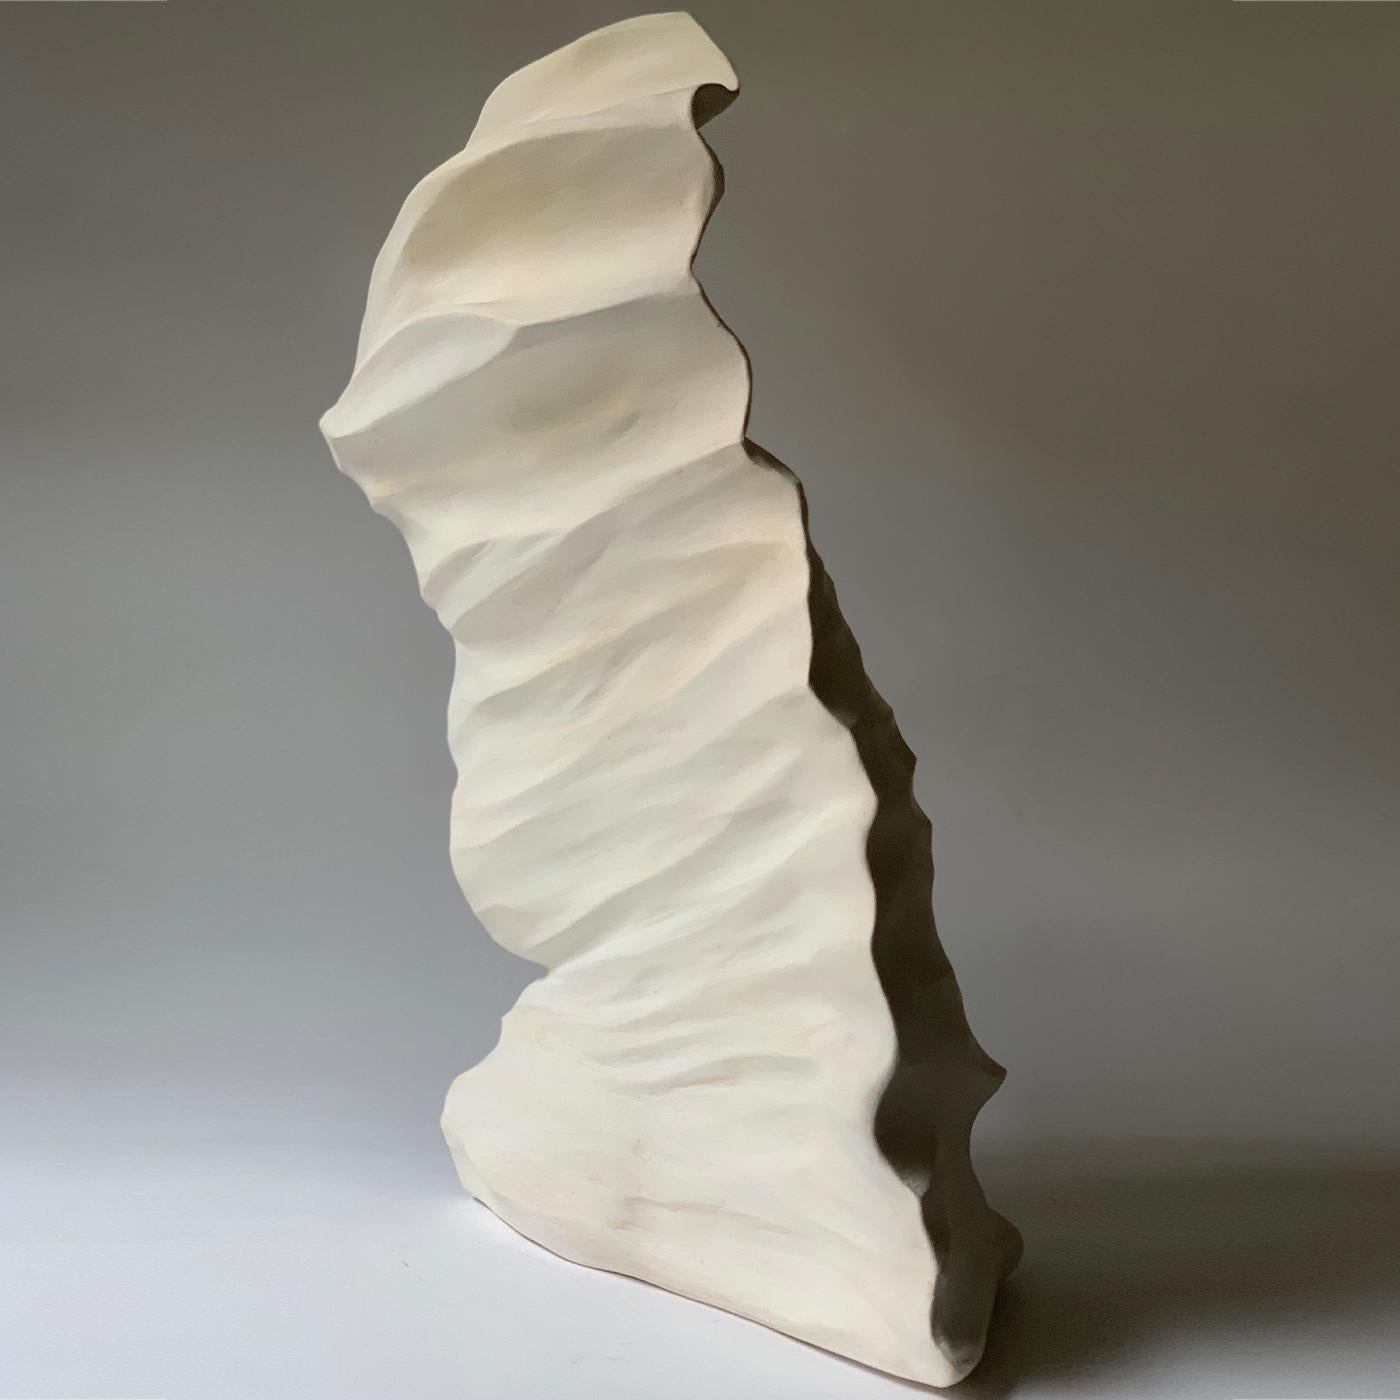 Part of a series based on emerged earth, on telluric movements, and the consequent creation of new shapes, this extraordinary sculpture is handmade of painted and coated earthenware, marked by delicate shades of yellow and pink, exuding a warm and